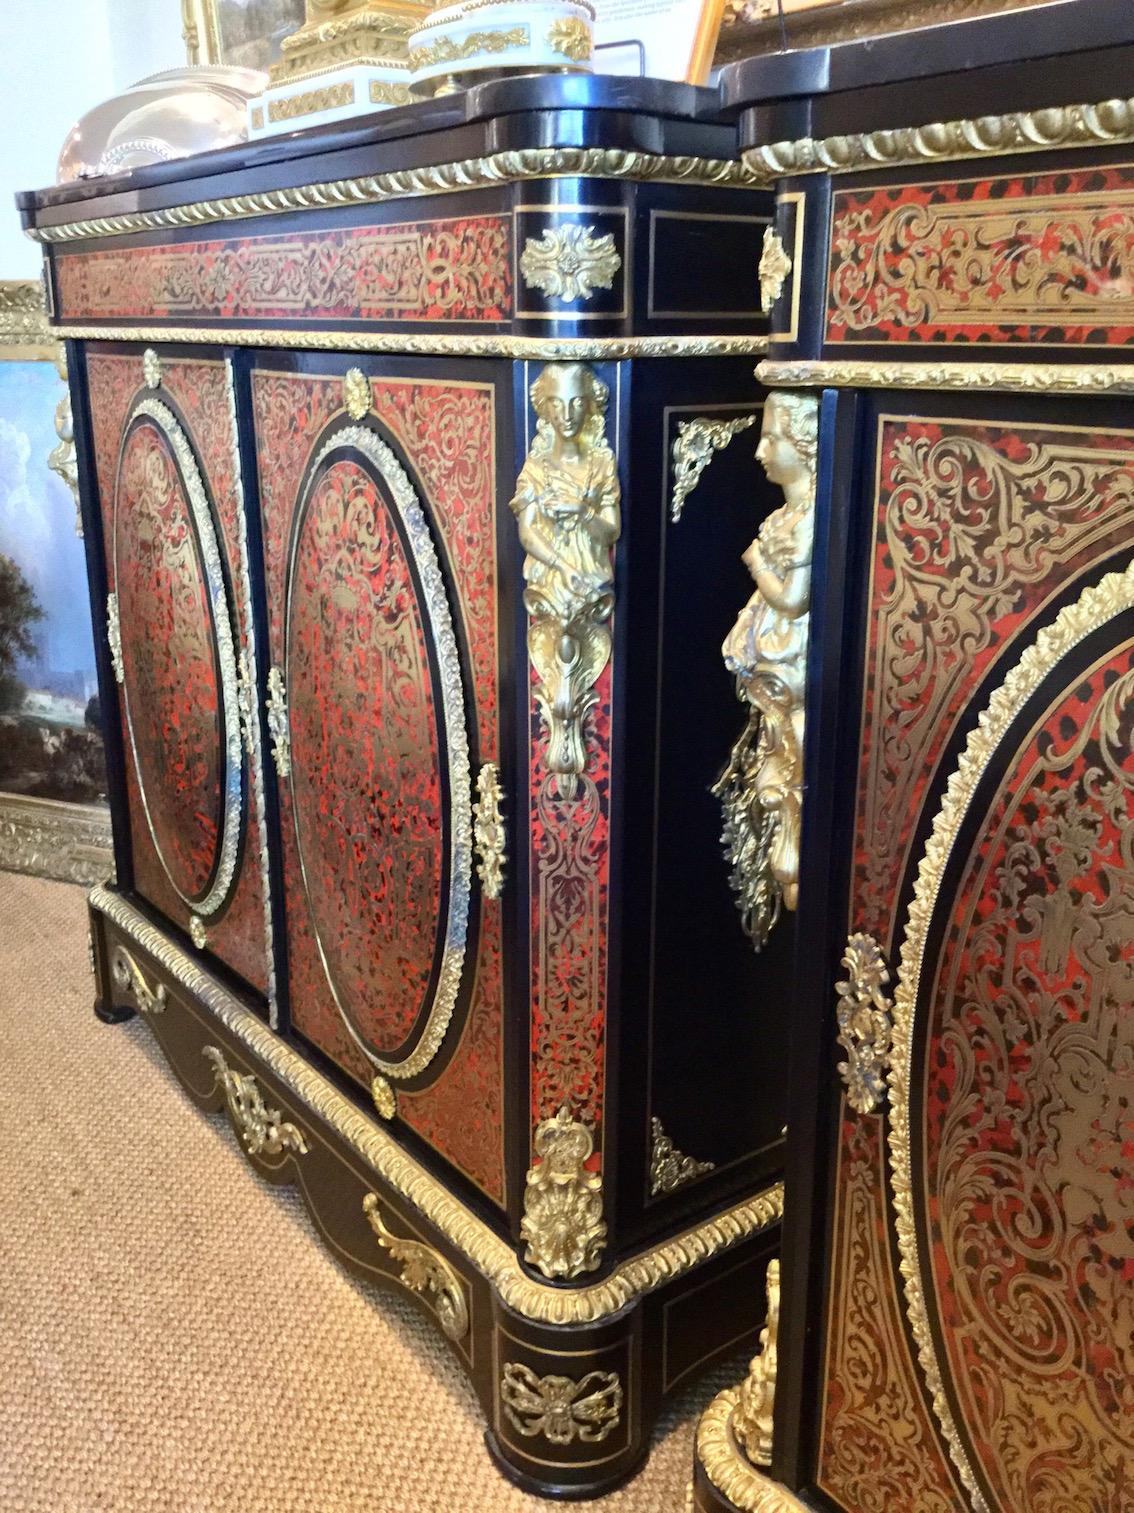 A pair of André-Charles Boulle (style) cabinets, circa 1860-1870

A pair of cabinets in the style of André-Charles Boulle. They are of mahogany with tortoiseshell (turtleshell) marquetry and beautifully applied gilt bronze ormolu mounts, handles